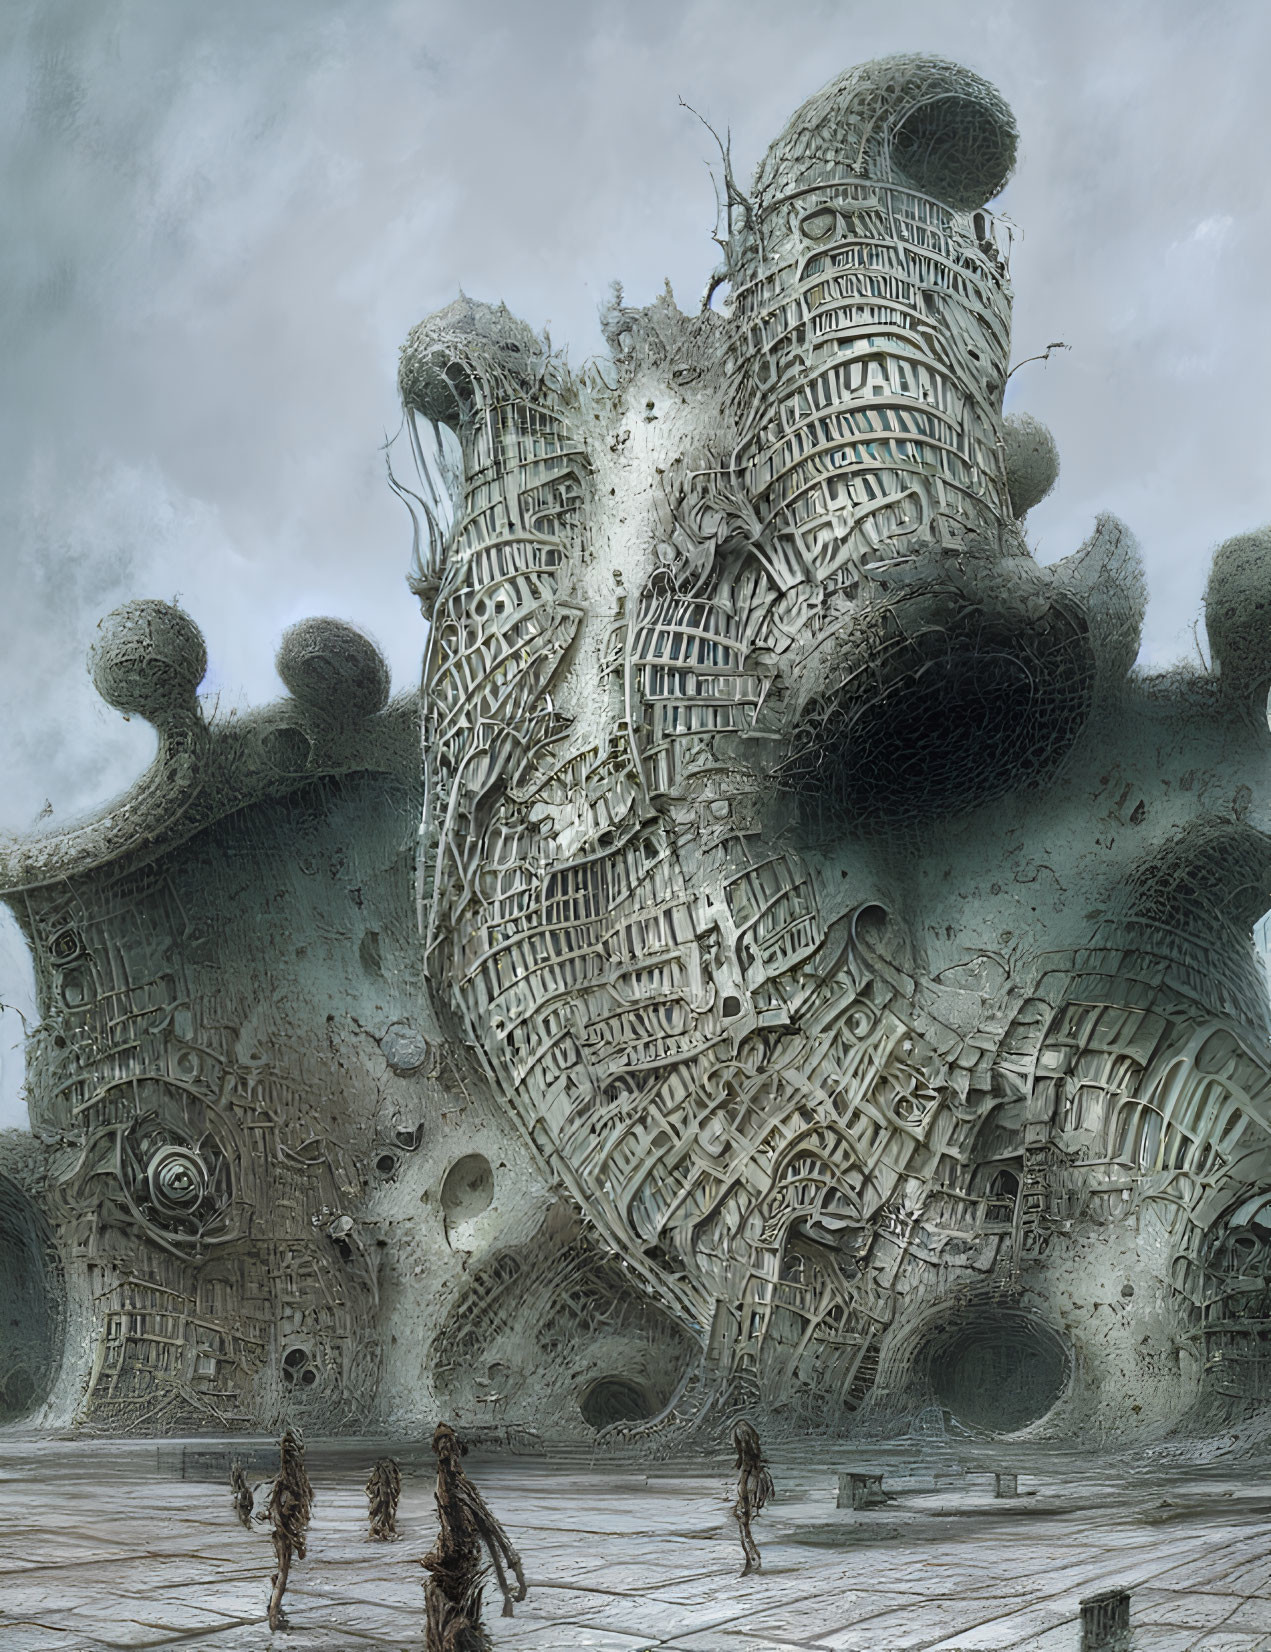 Surreal dystopian landscape with towering structures and wandering figures